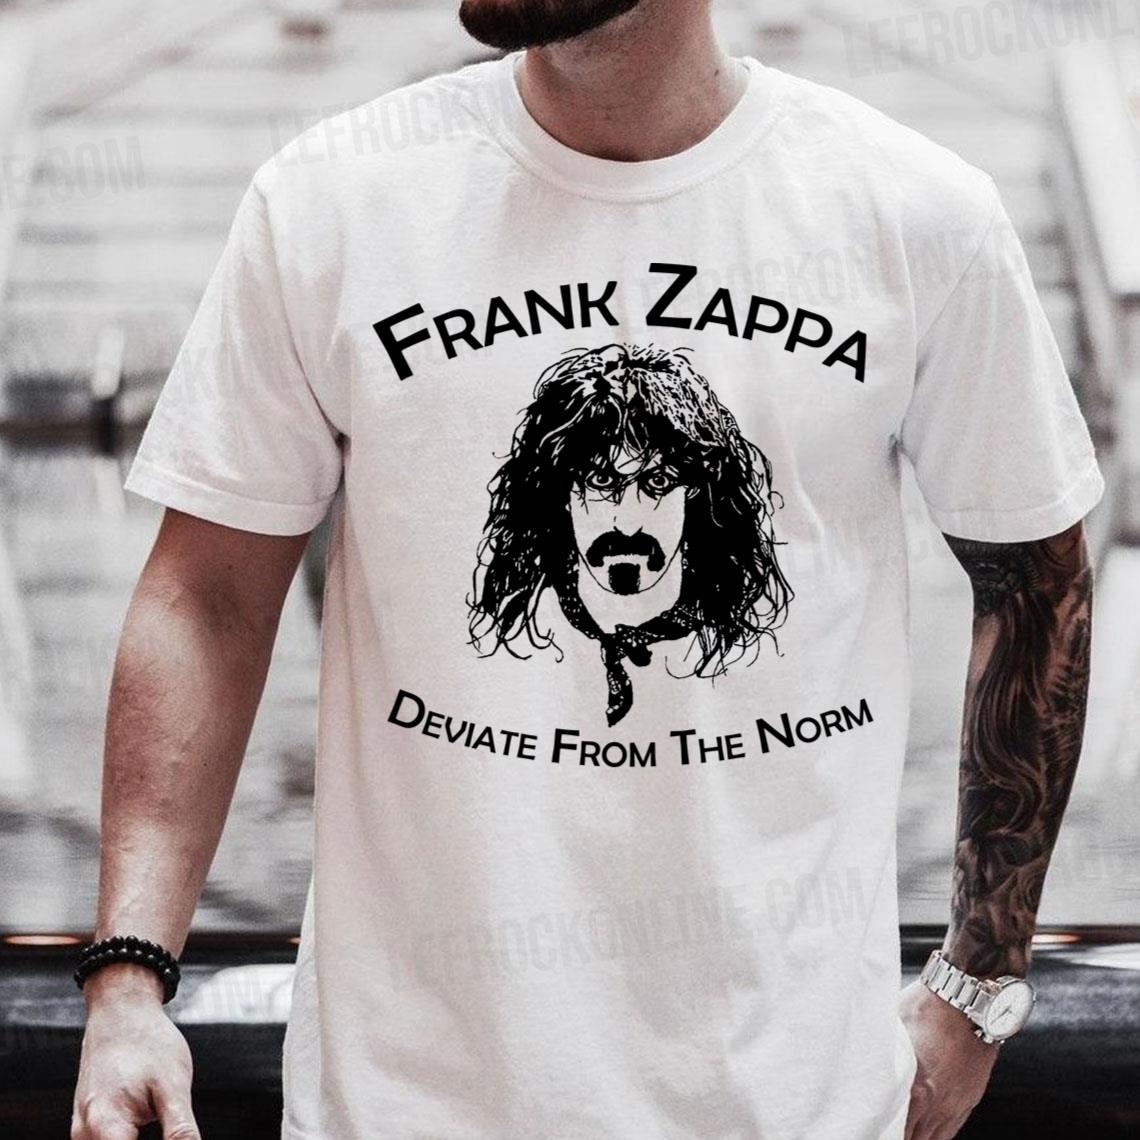 Frank Zappa Deviate From The Norm Frank Zappa T Shirt